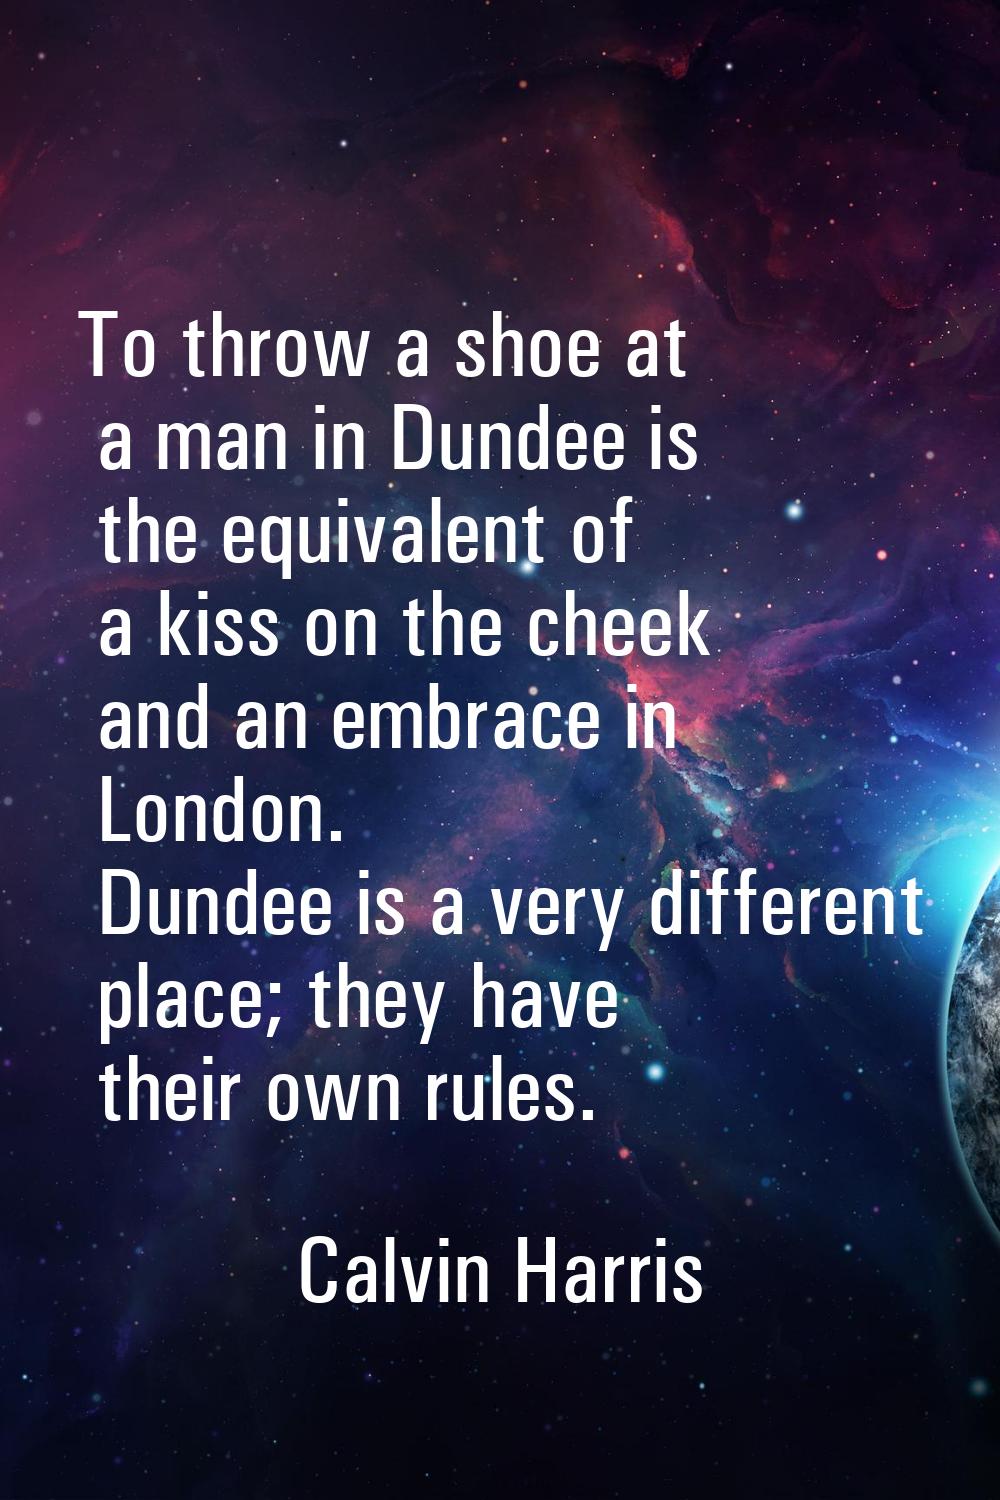 To throw a shoe at a man in Dundee is the equivalent of a kiss on the cheek and an embrace in Londo